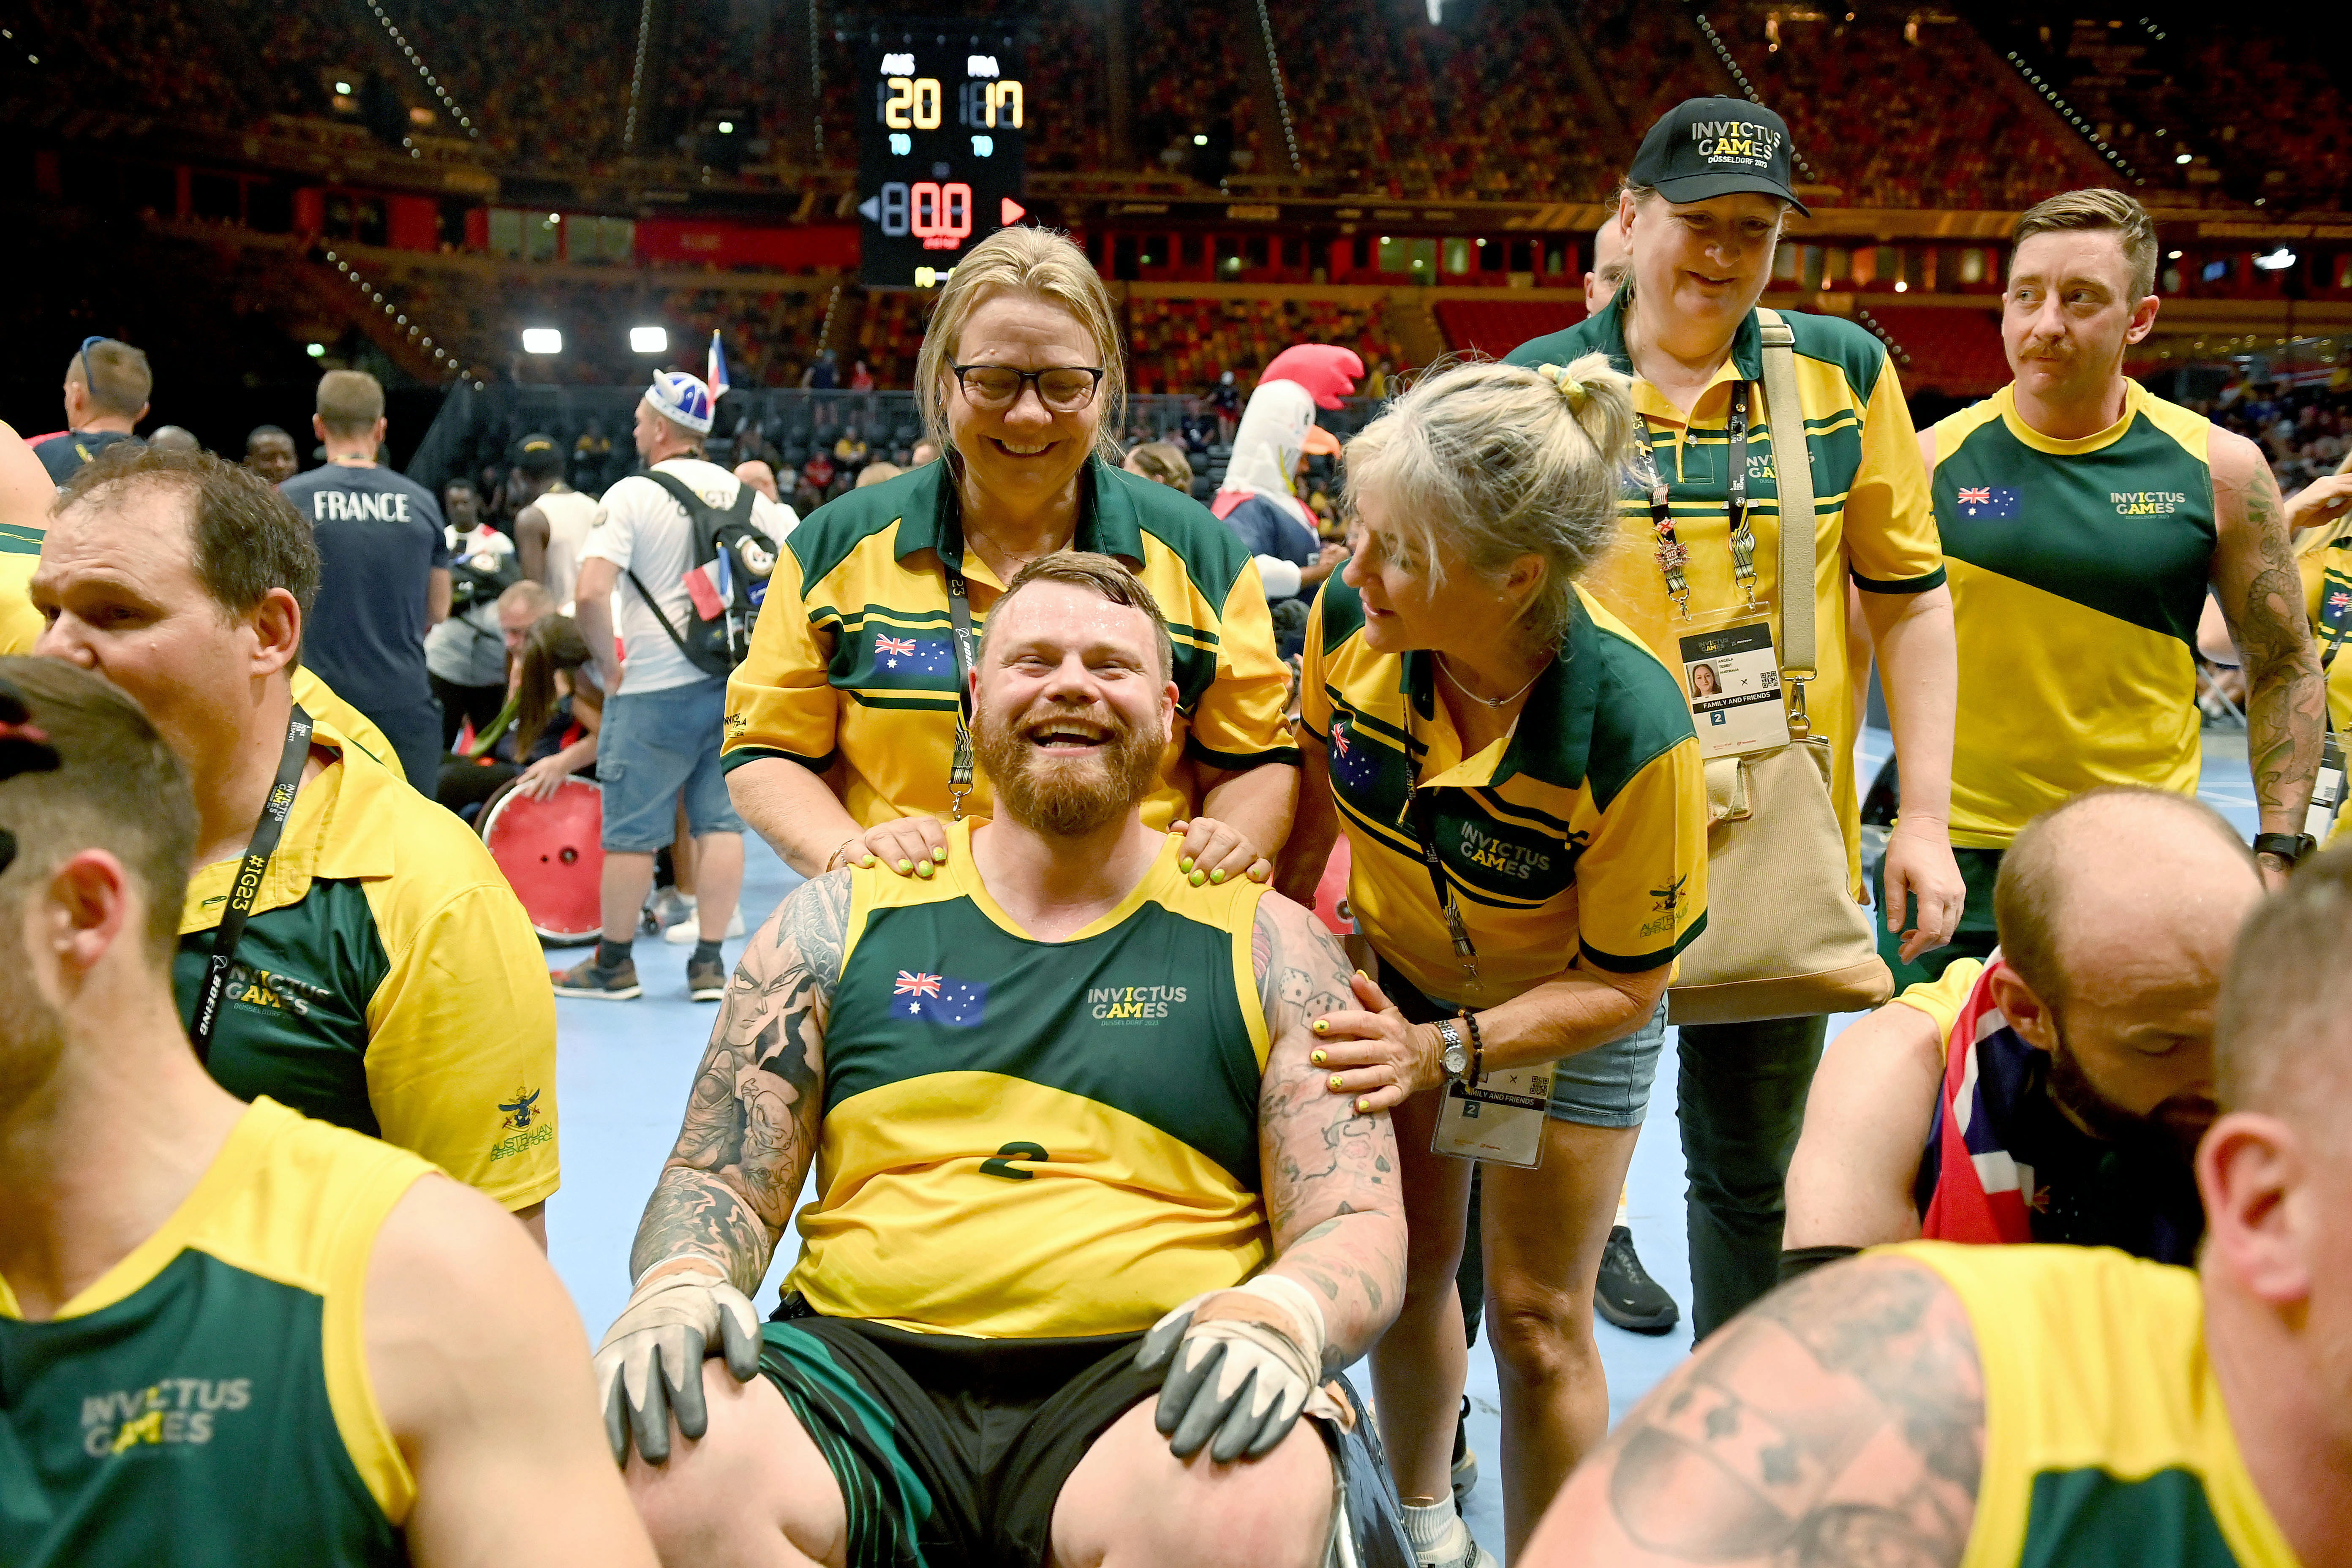 Shaun Hillman celebrates with family and friends at Invictus Games Dusseldorf 2023